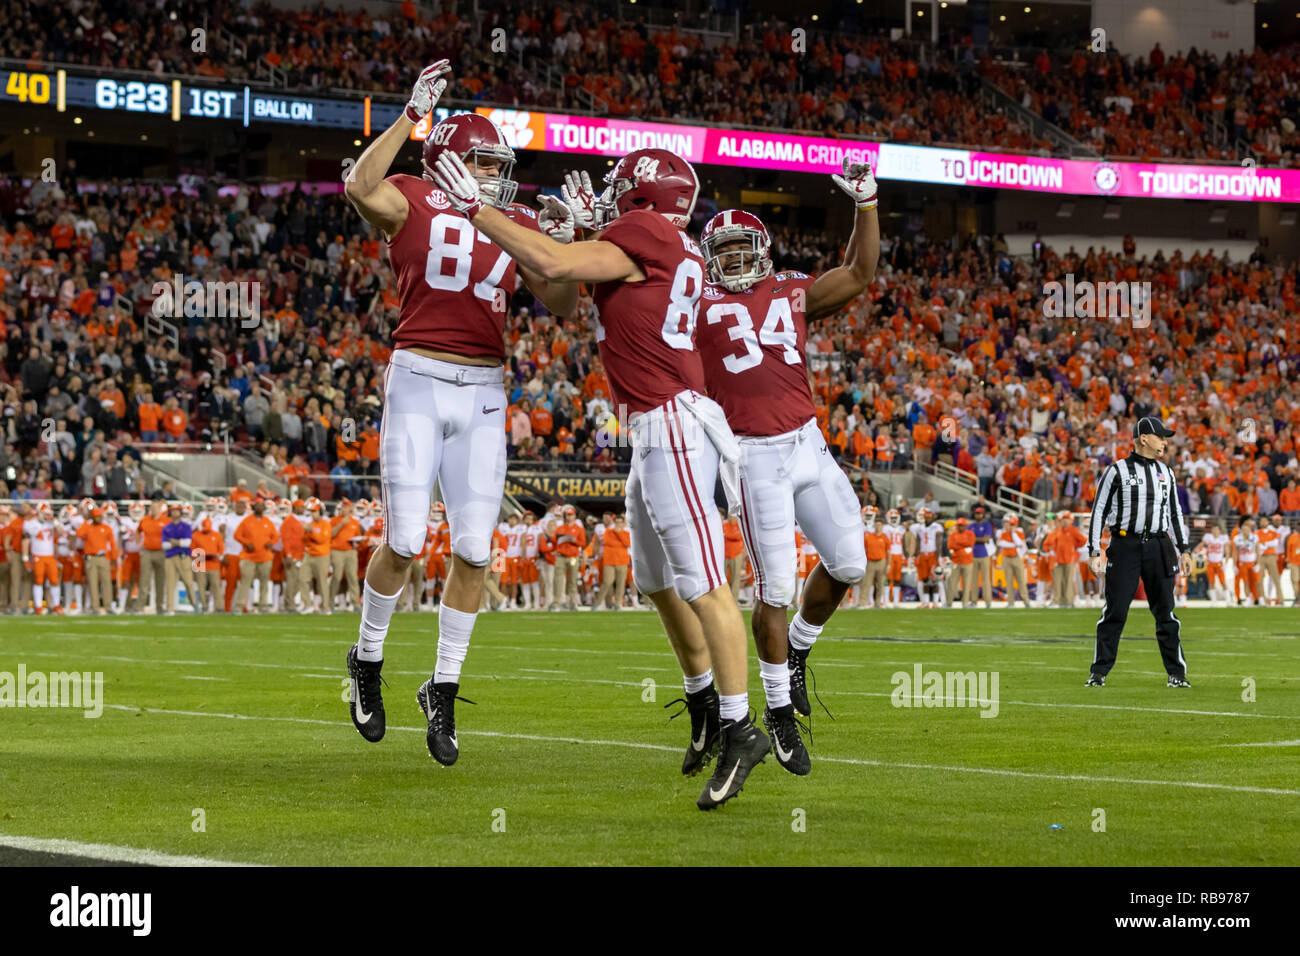 Santa Clara, California, USA. 7th Jan, 2019. Alabama Crimson Tide tight end HALE HENTGES (84) celebrates after catching a pass for a touchdown in the College Football Playoff National Championship game between the Clemson Tigers and the Alabama Crimson Tide at Levi's Stadium. Credit: Adam Lacy/ZUMA Wire/Alamy Live News Stock Photo